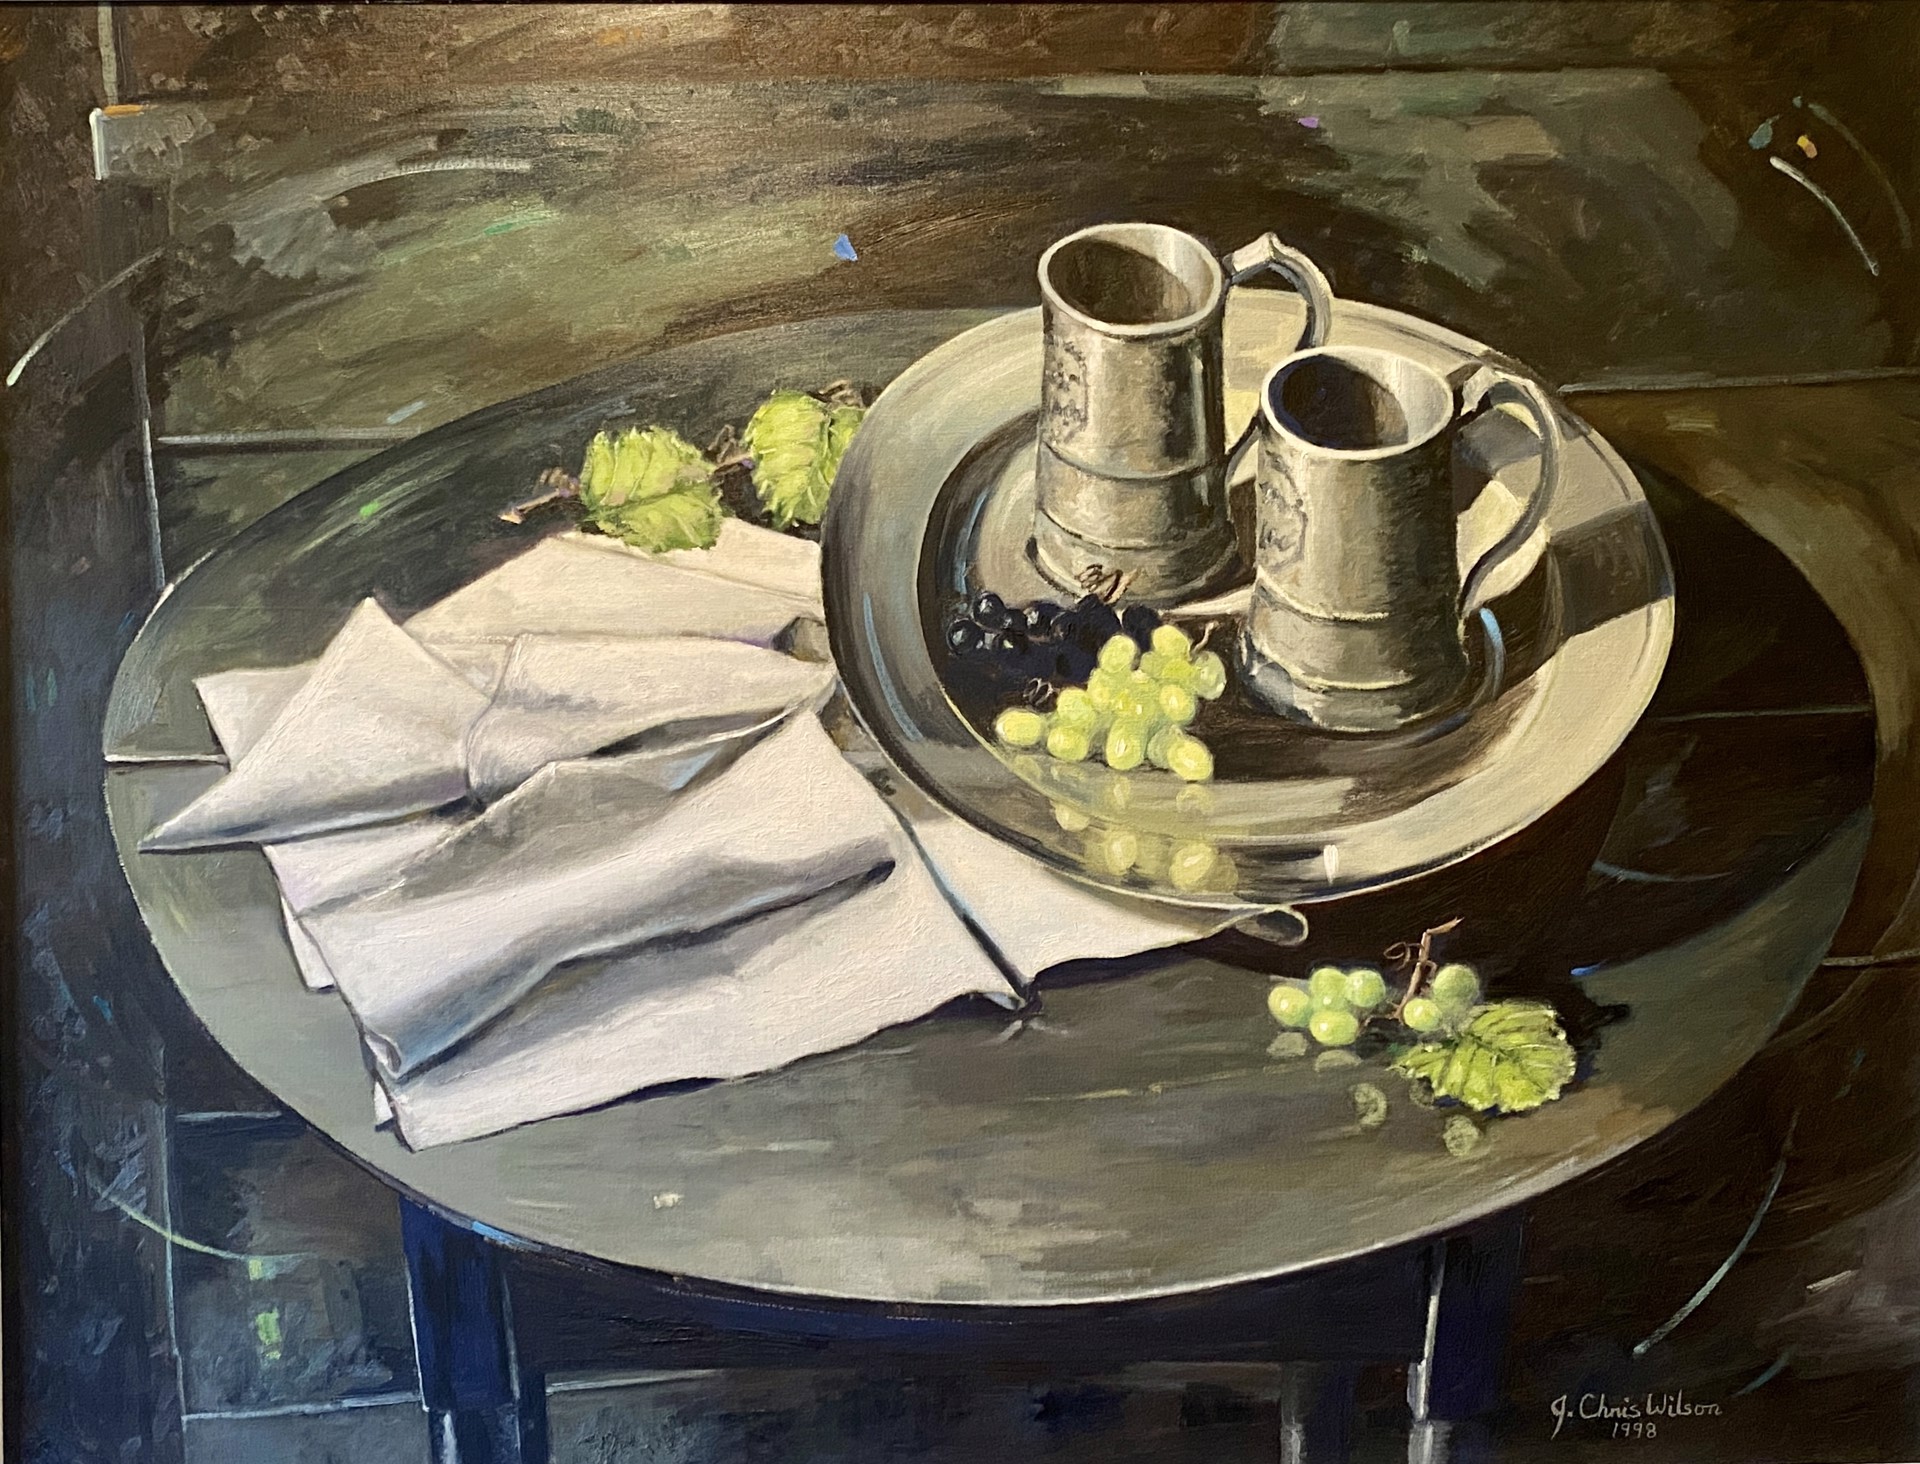 Still Life with Pewter by J. Chris Wilson